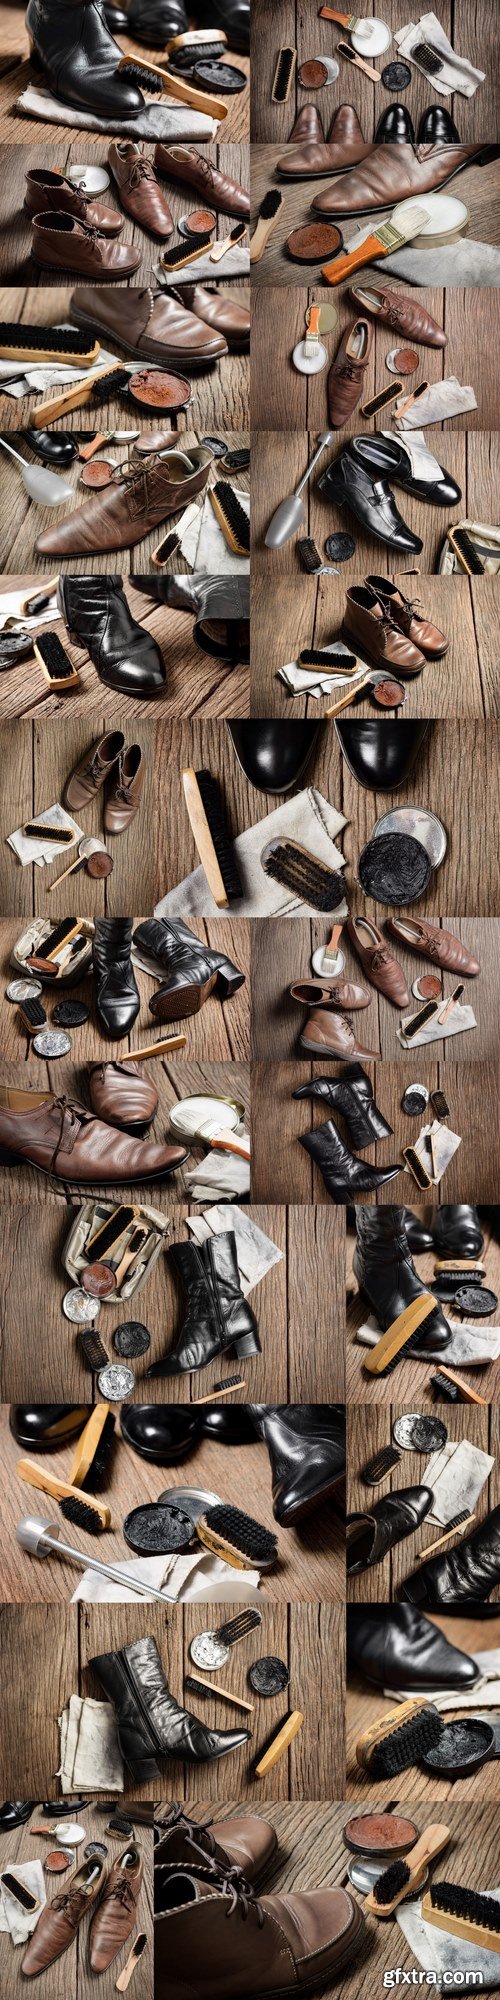 Сleaning shoes